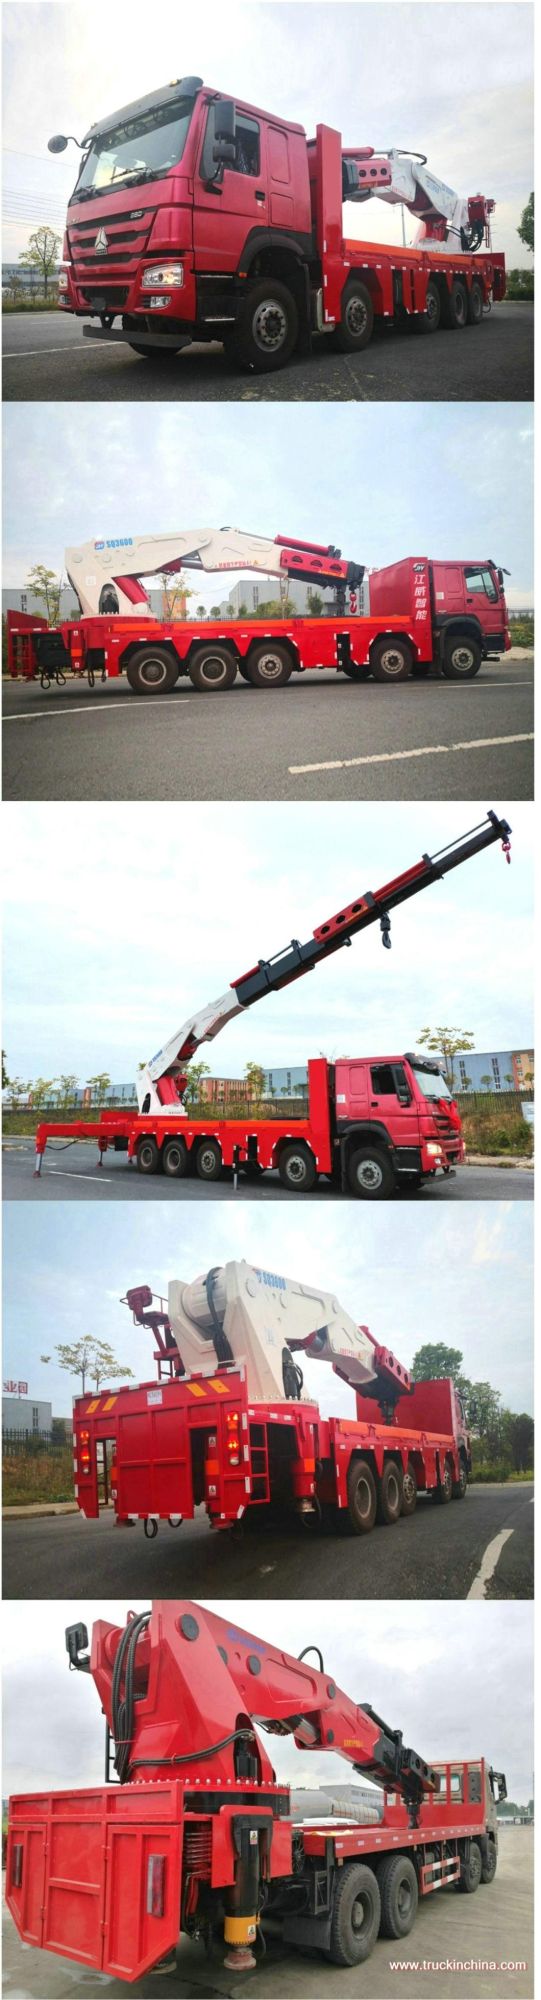 180t Knuckle Crane Hoist 90 Tons at 4 Meters, 45 Tons at 8 Meters,   22 Tons at 13.2 Meters 3600kn. M Sq3600zb6 Intelligent Remotely Control Folding Boom